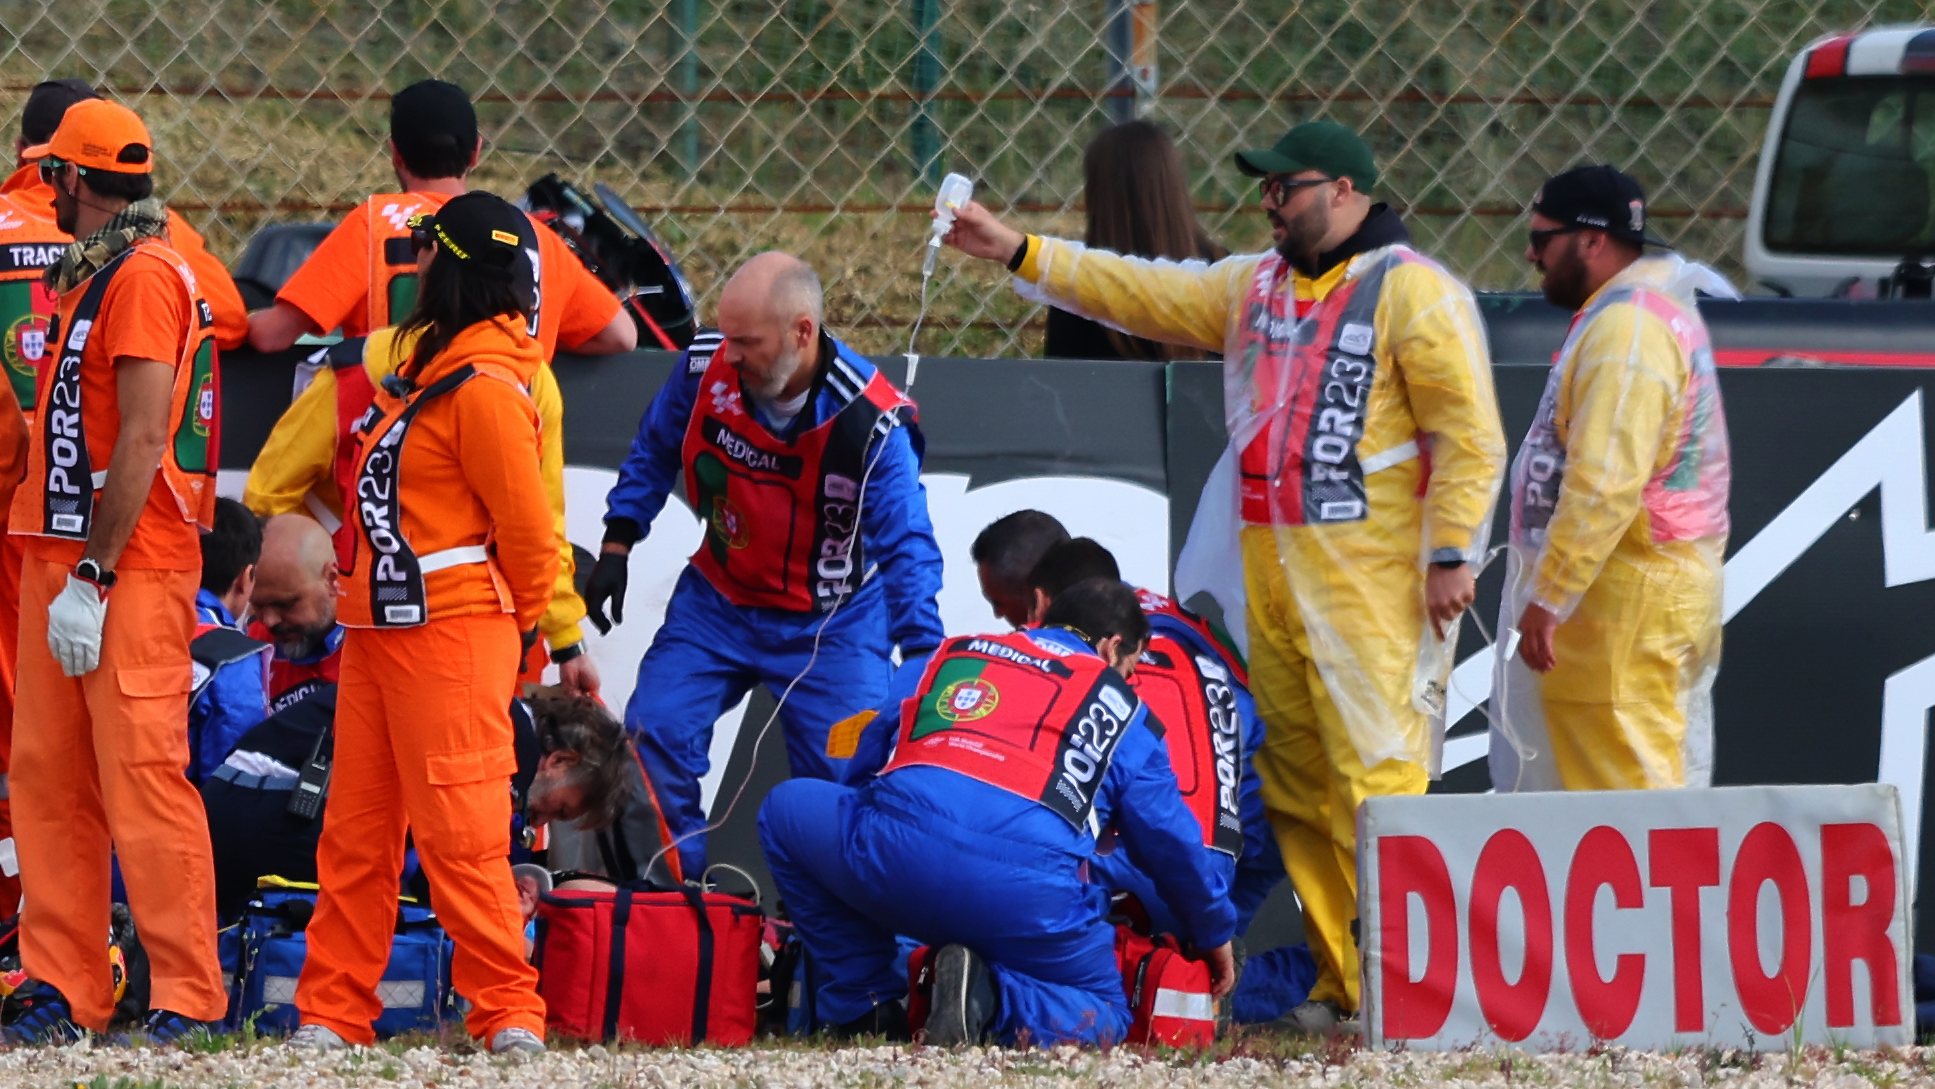 Spanish MotoGP rider Pol Espargaro of GASGAS Factory Racing Tech3 is assisted by a medical team after a fall during the second practice session for the the Motorcycling Grand Prix of Portugal at Algarve International race track, Portimao, south of Portugal, 24 March 2023. The Motorcycling Grand Prix of Portugal will take place on 26 March 2023. NUNO VEIGA/LUSA